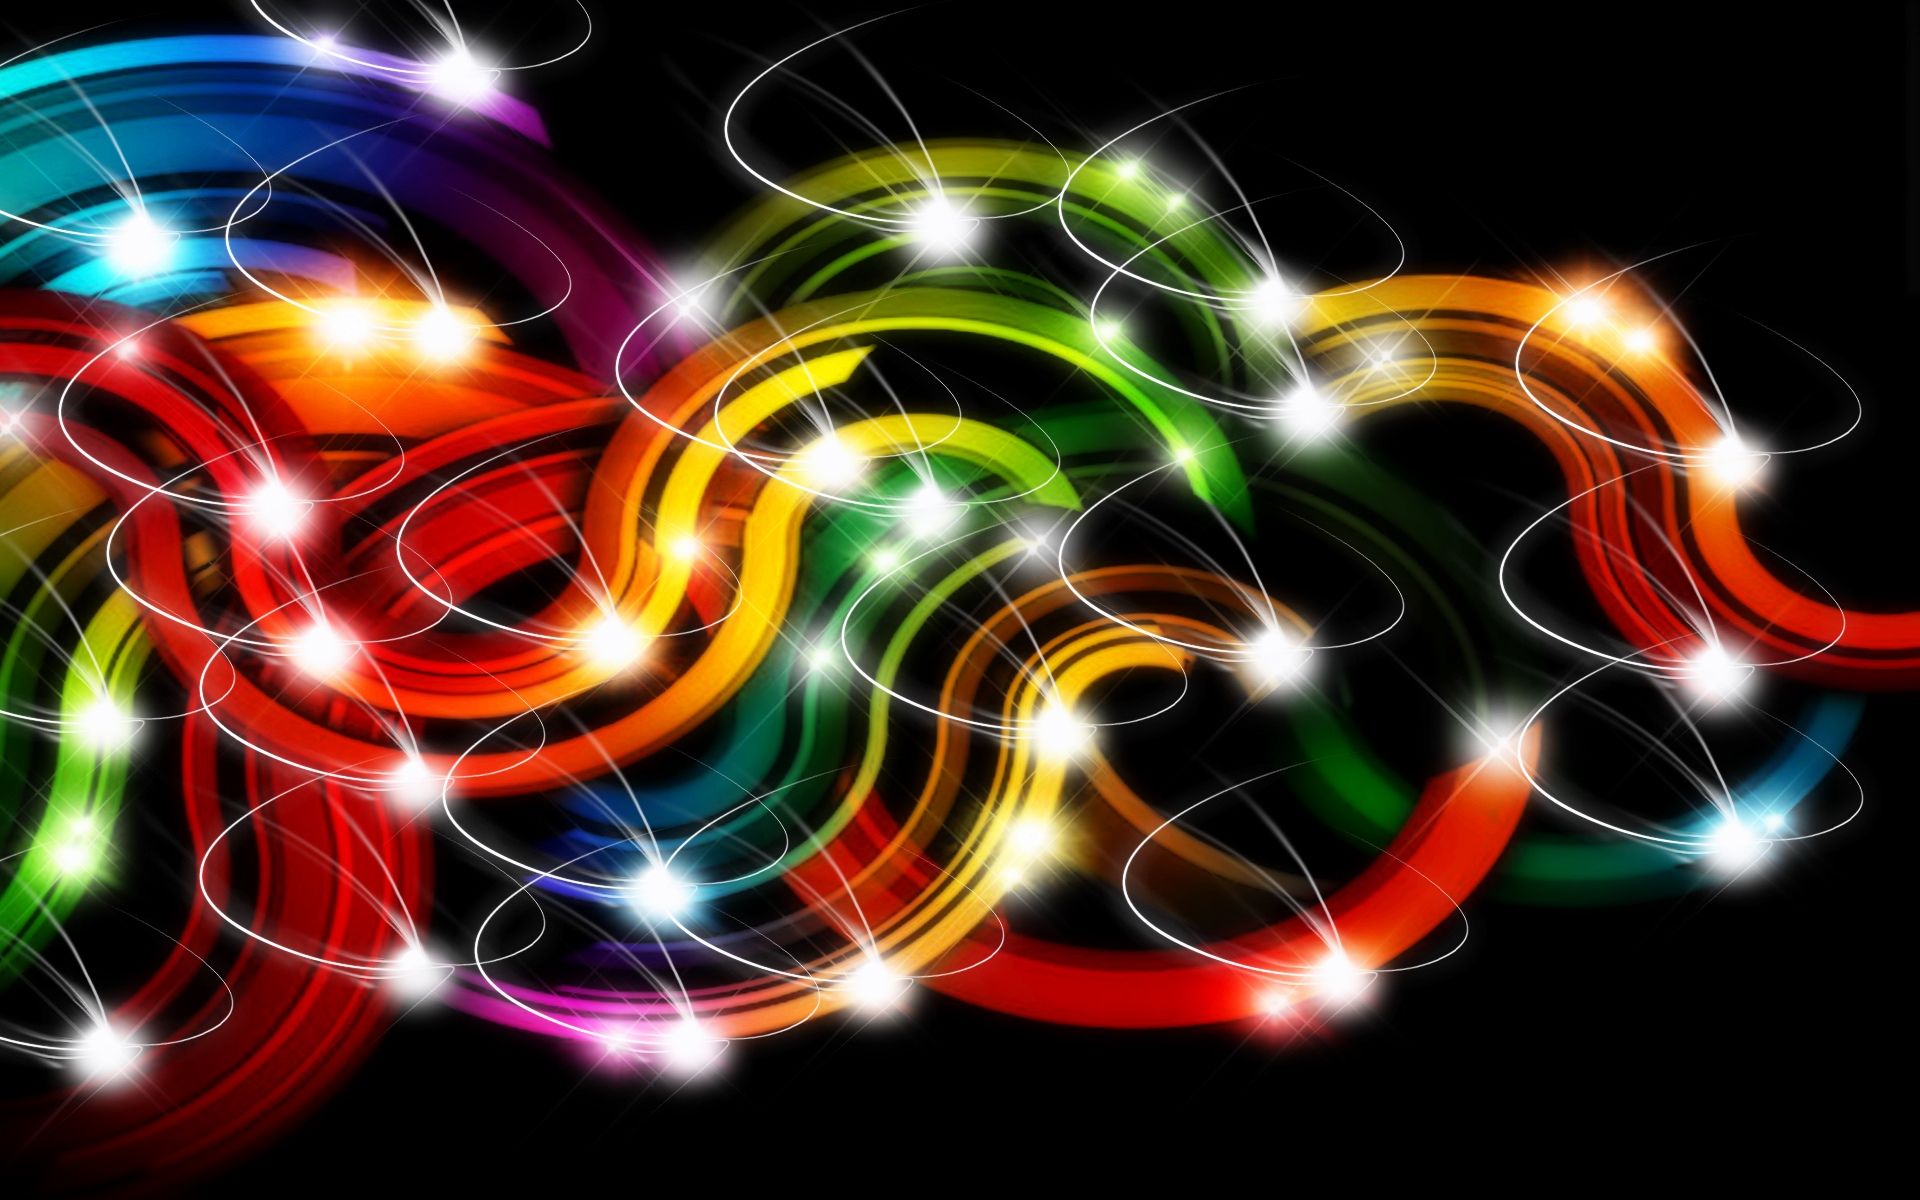 Most Amazing 3d Digital Colorful Abstract Wallpaper